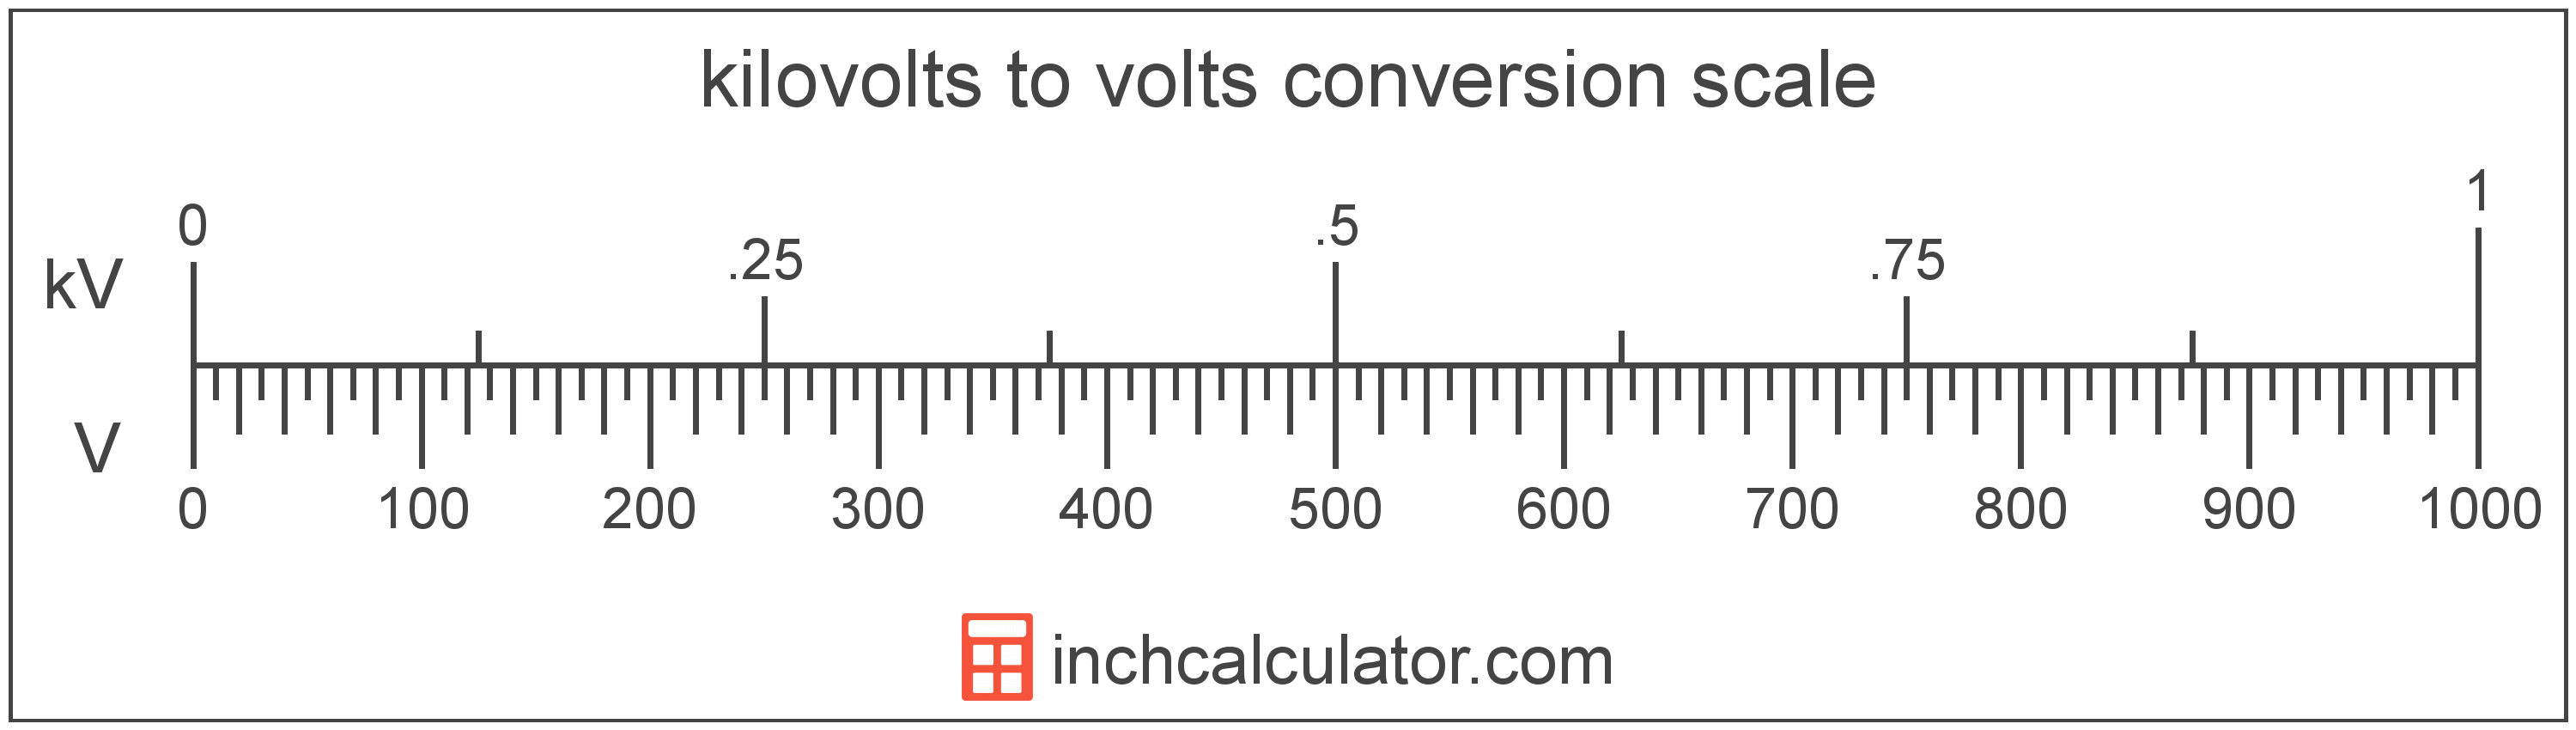 conversion scale showing volts and equivalent kilovolts voltage values